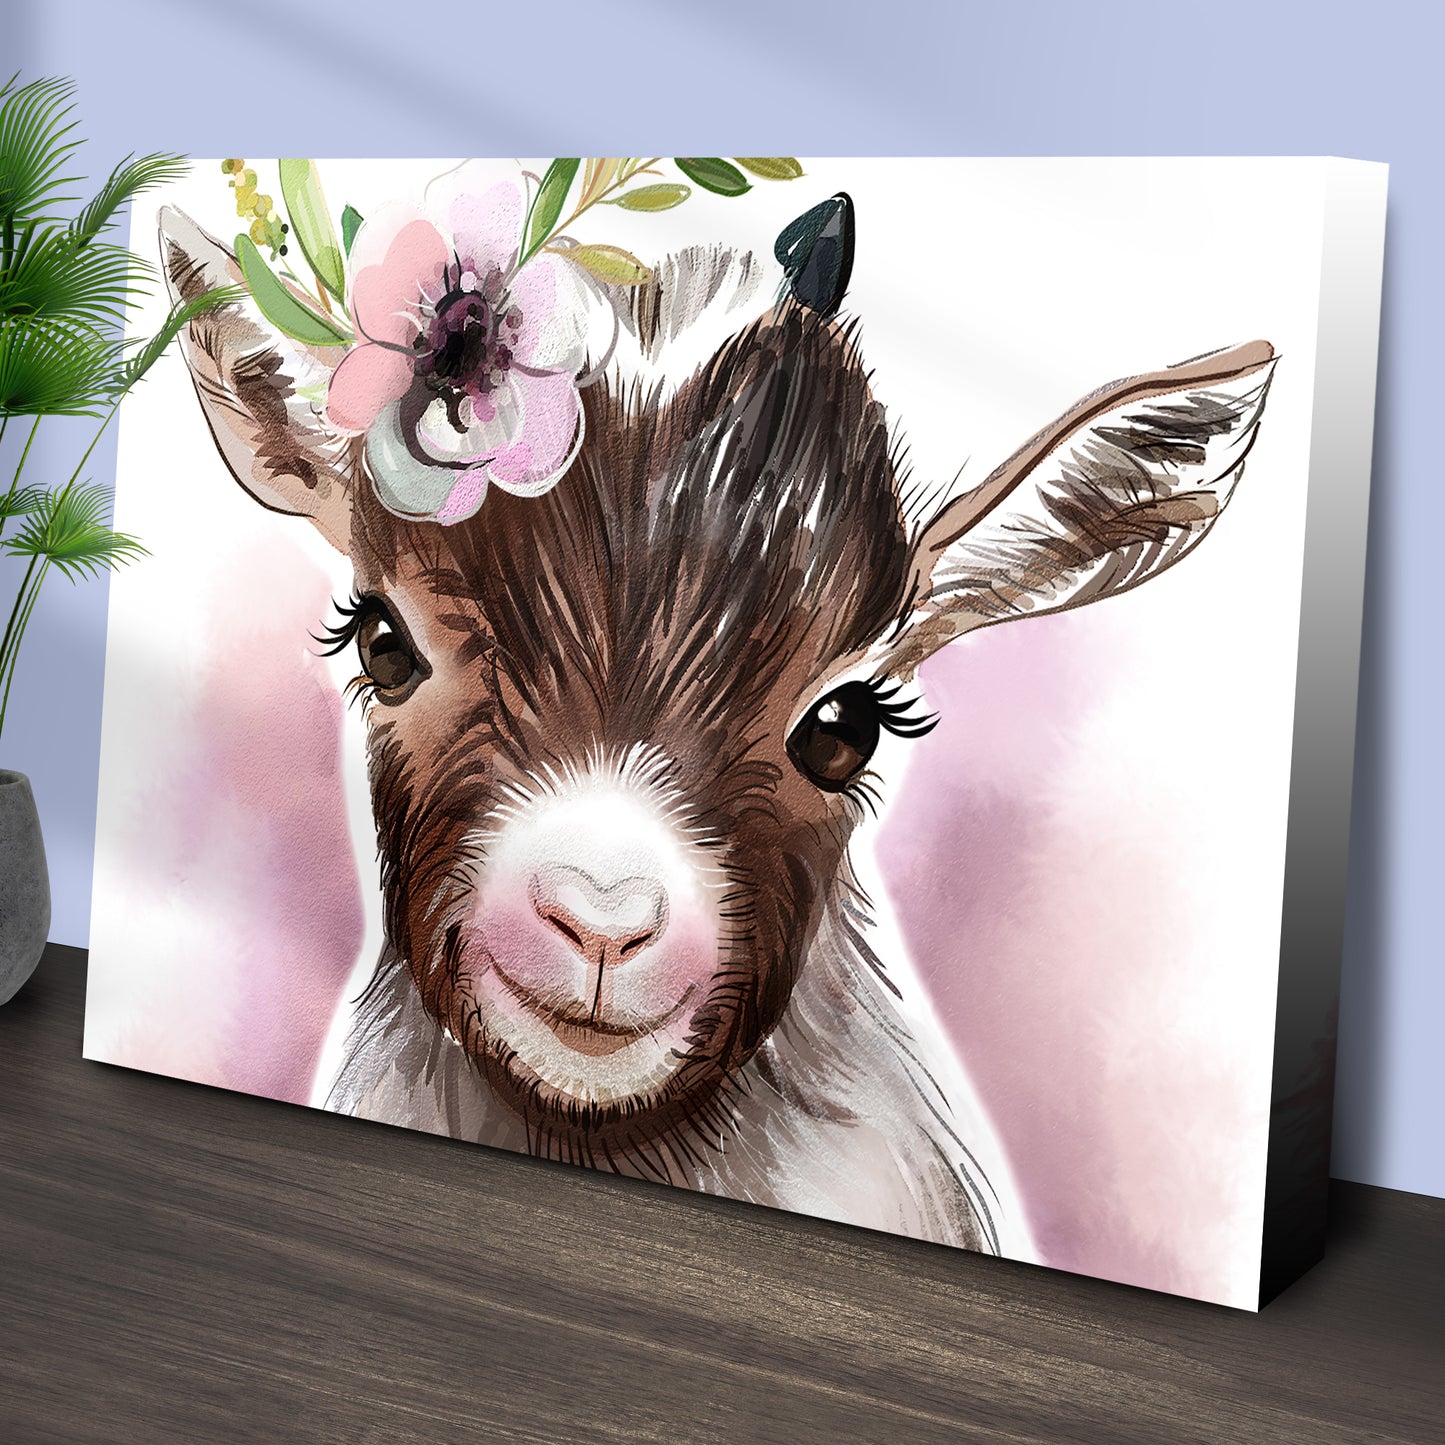 Flower Crown Baby Goat Canvas Wall Art Style 1 - Image by Tailored Canvases